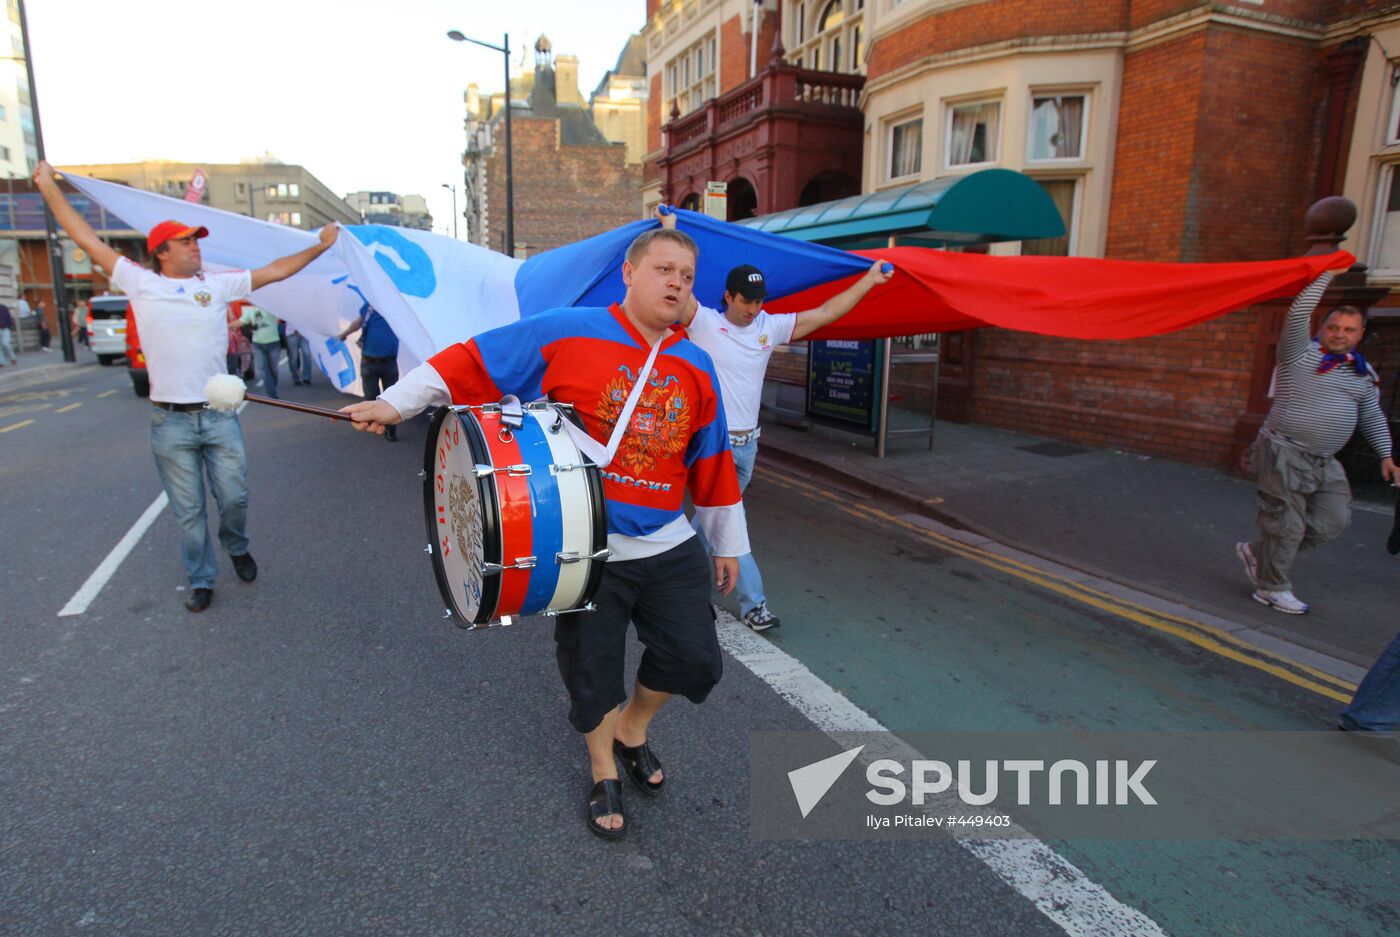 Russian fans celebrate team's World Cup qualifier win in Cardiff